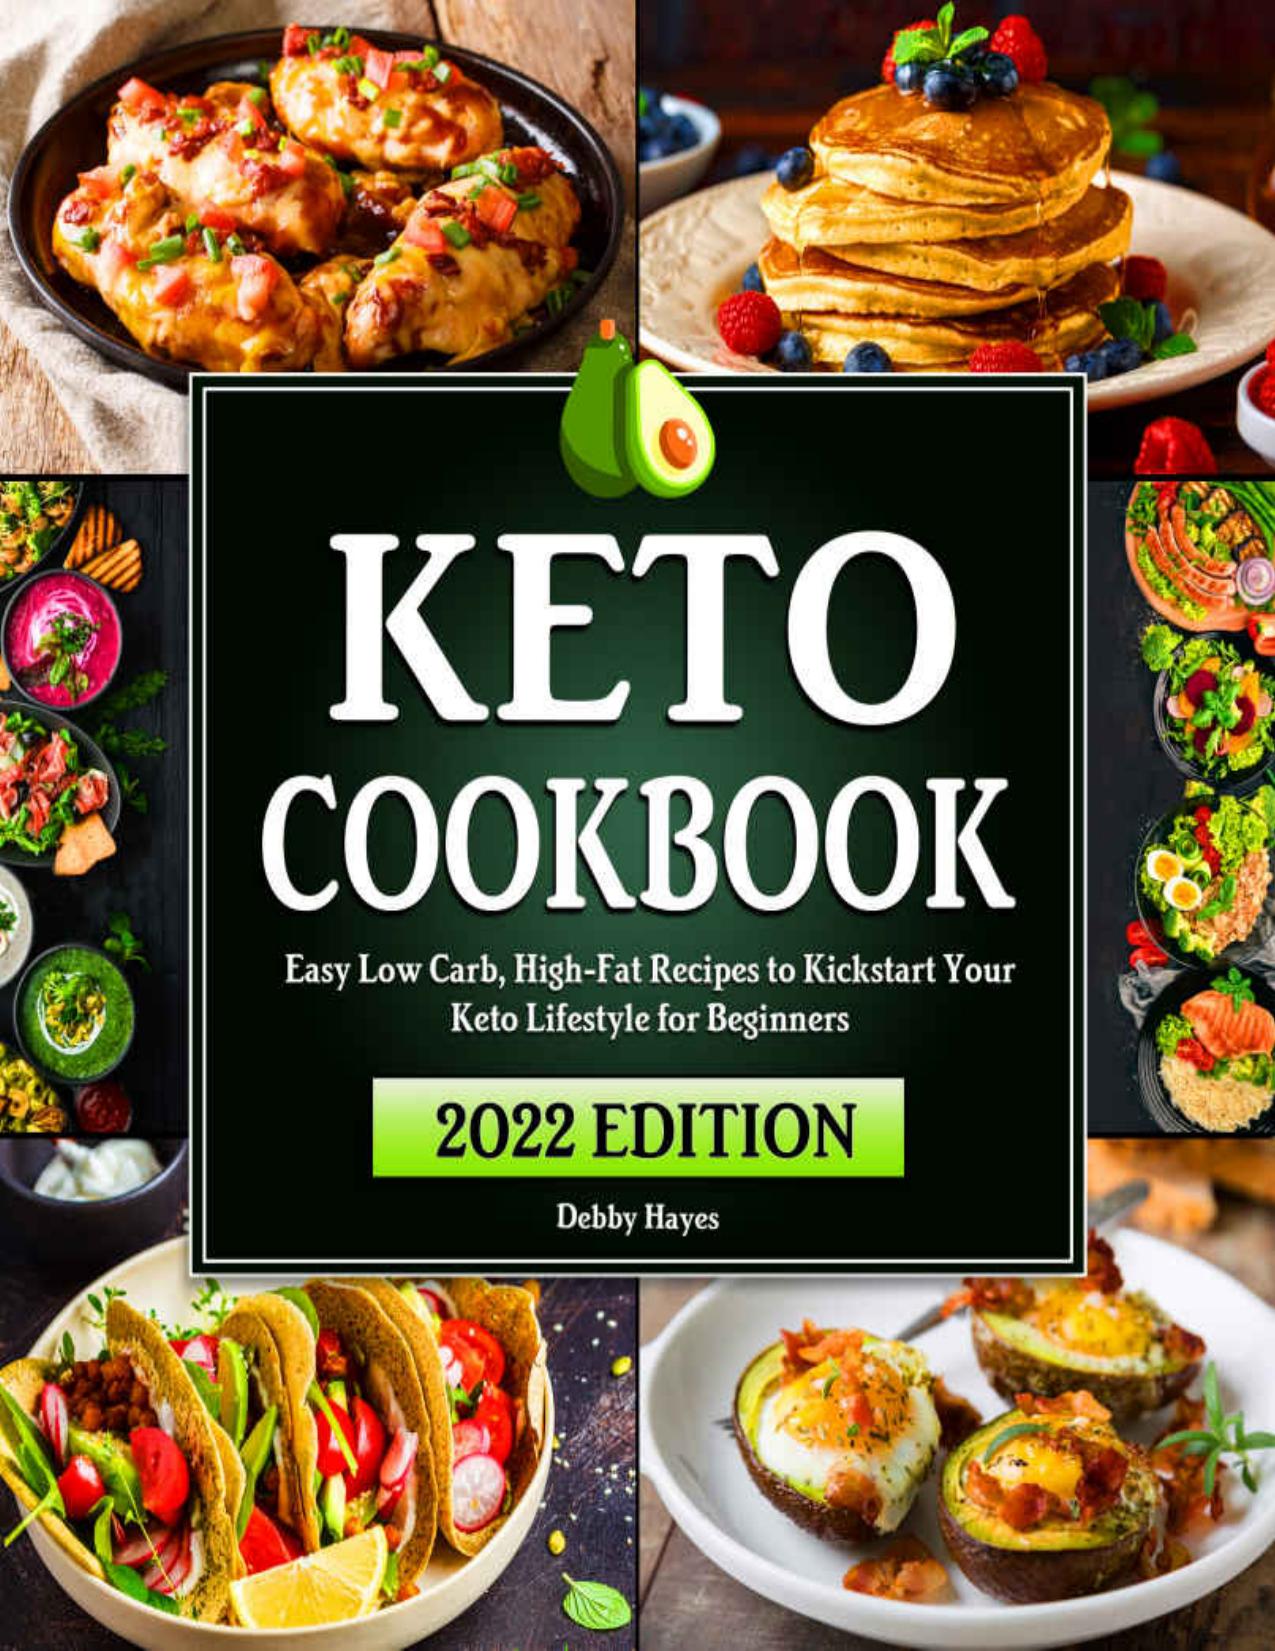 Keto Cookbook For Beginners: Easy Low Carb, High-Fat Recipes to Kickstart Your Keto Lifestyle | Beginners Guide with a 21-Day Meal Plan by Debby Hayes